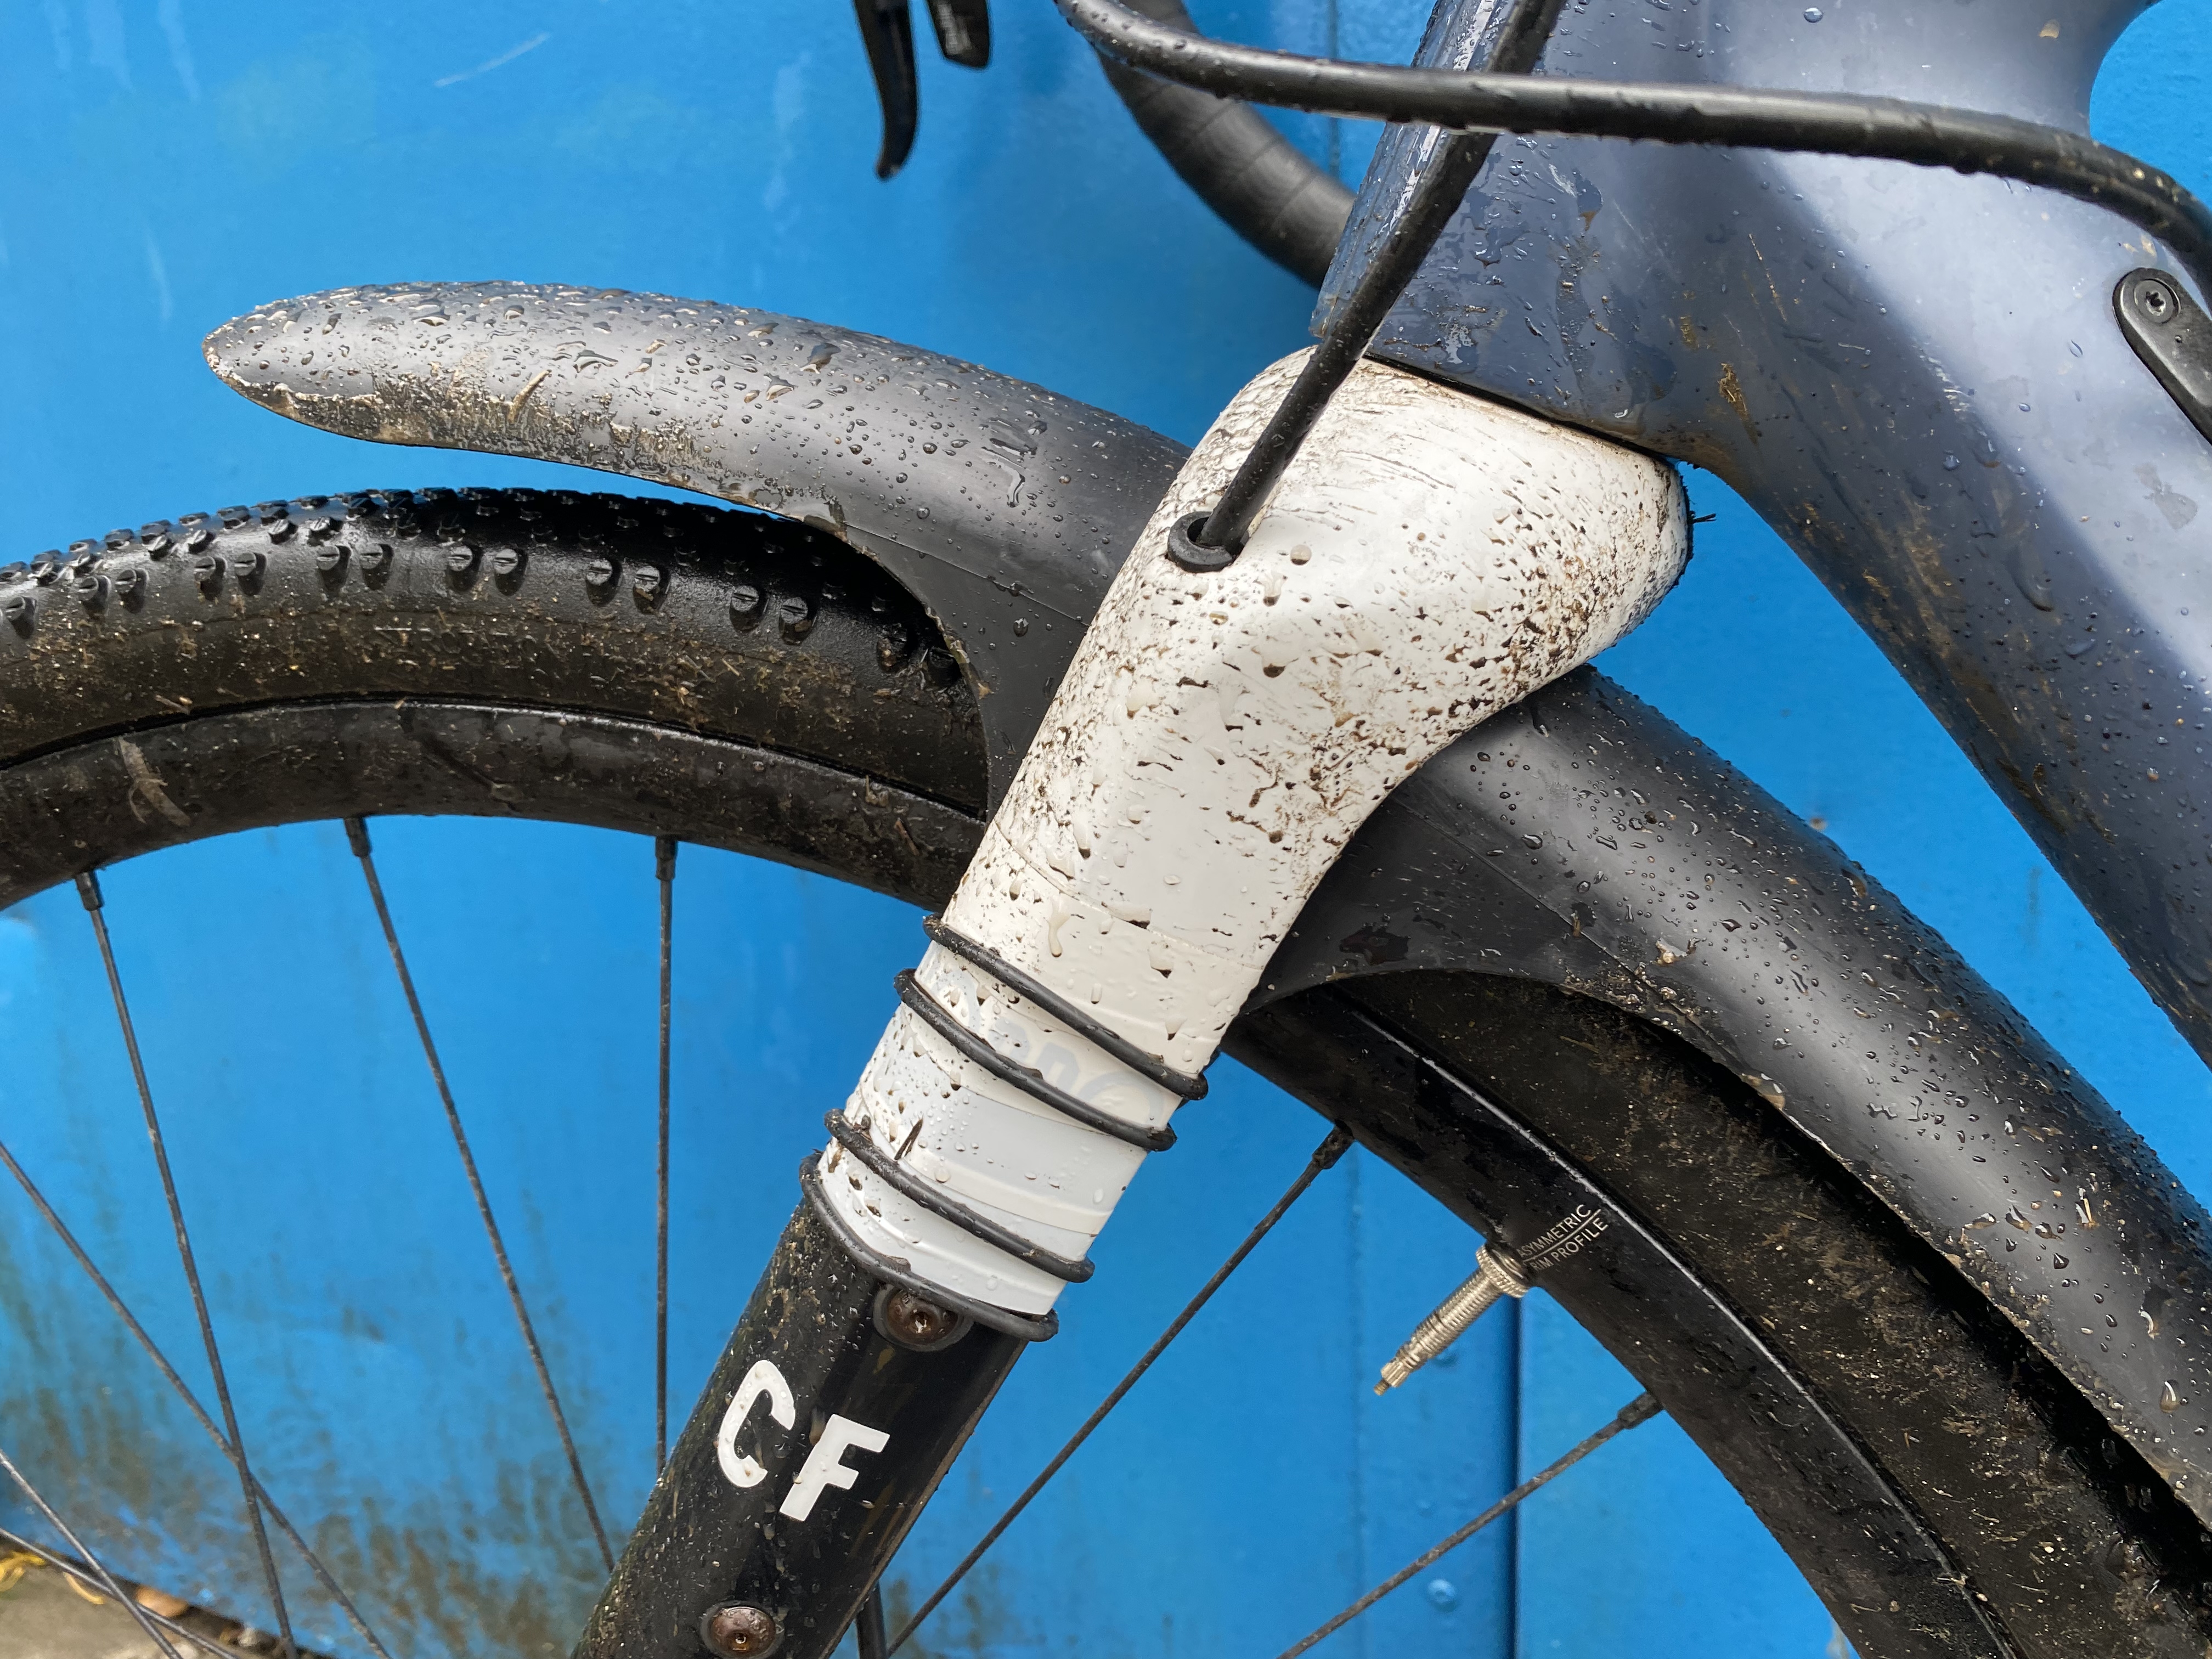 Image shows a gravel bike with the Mudhugger Gravelhugger front fender / mudguard attached.